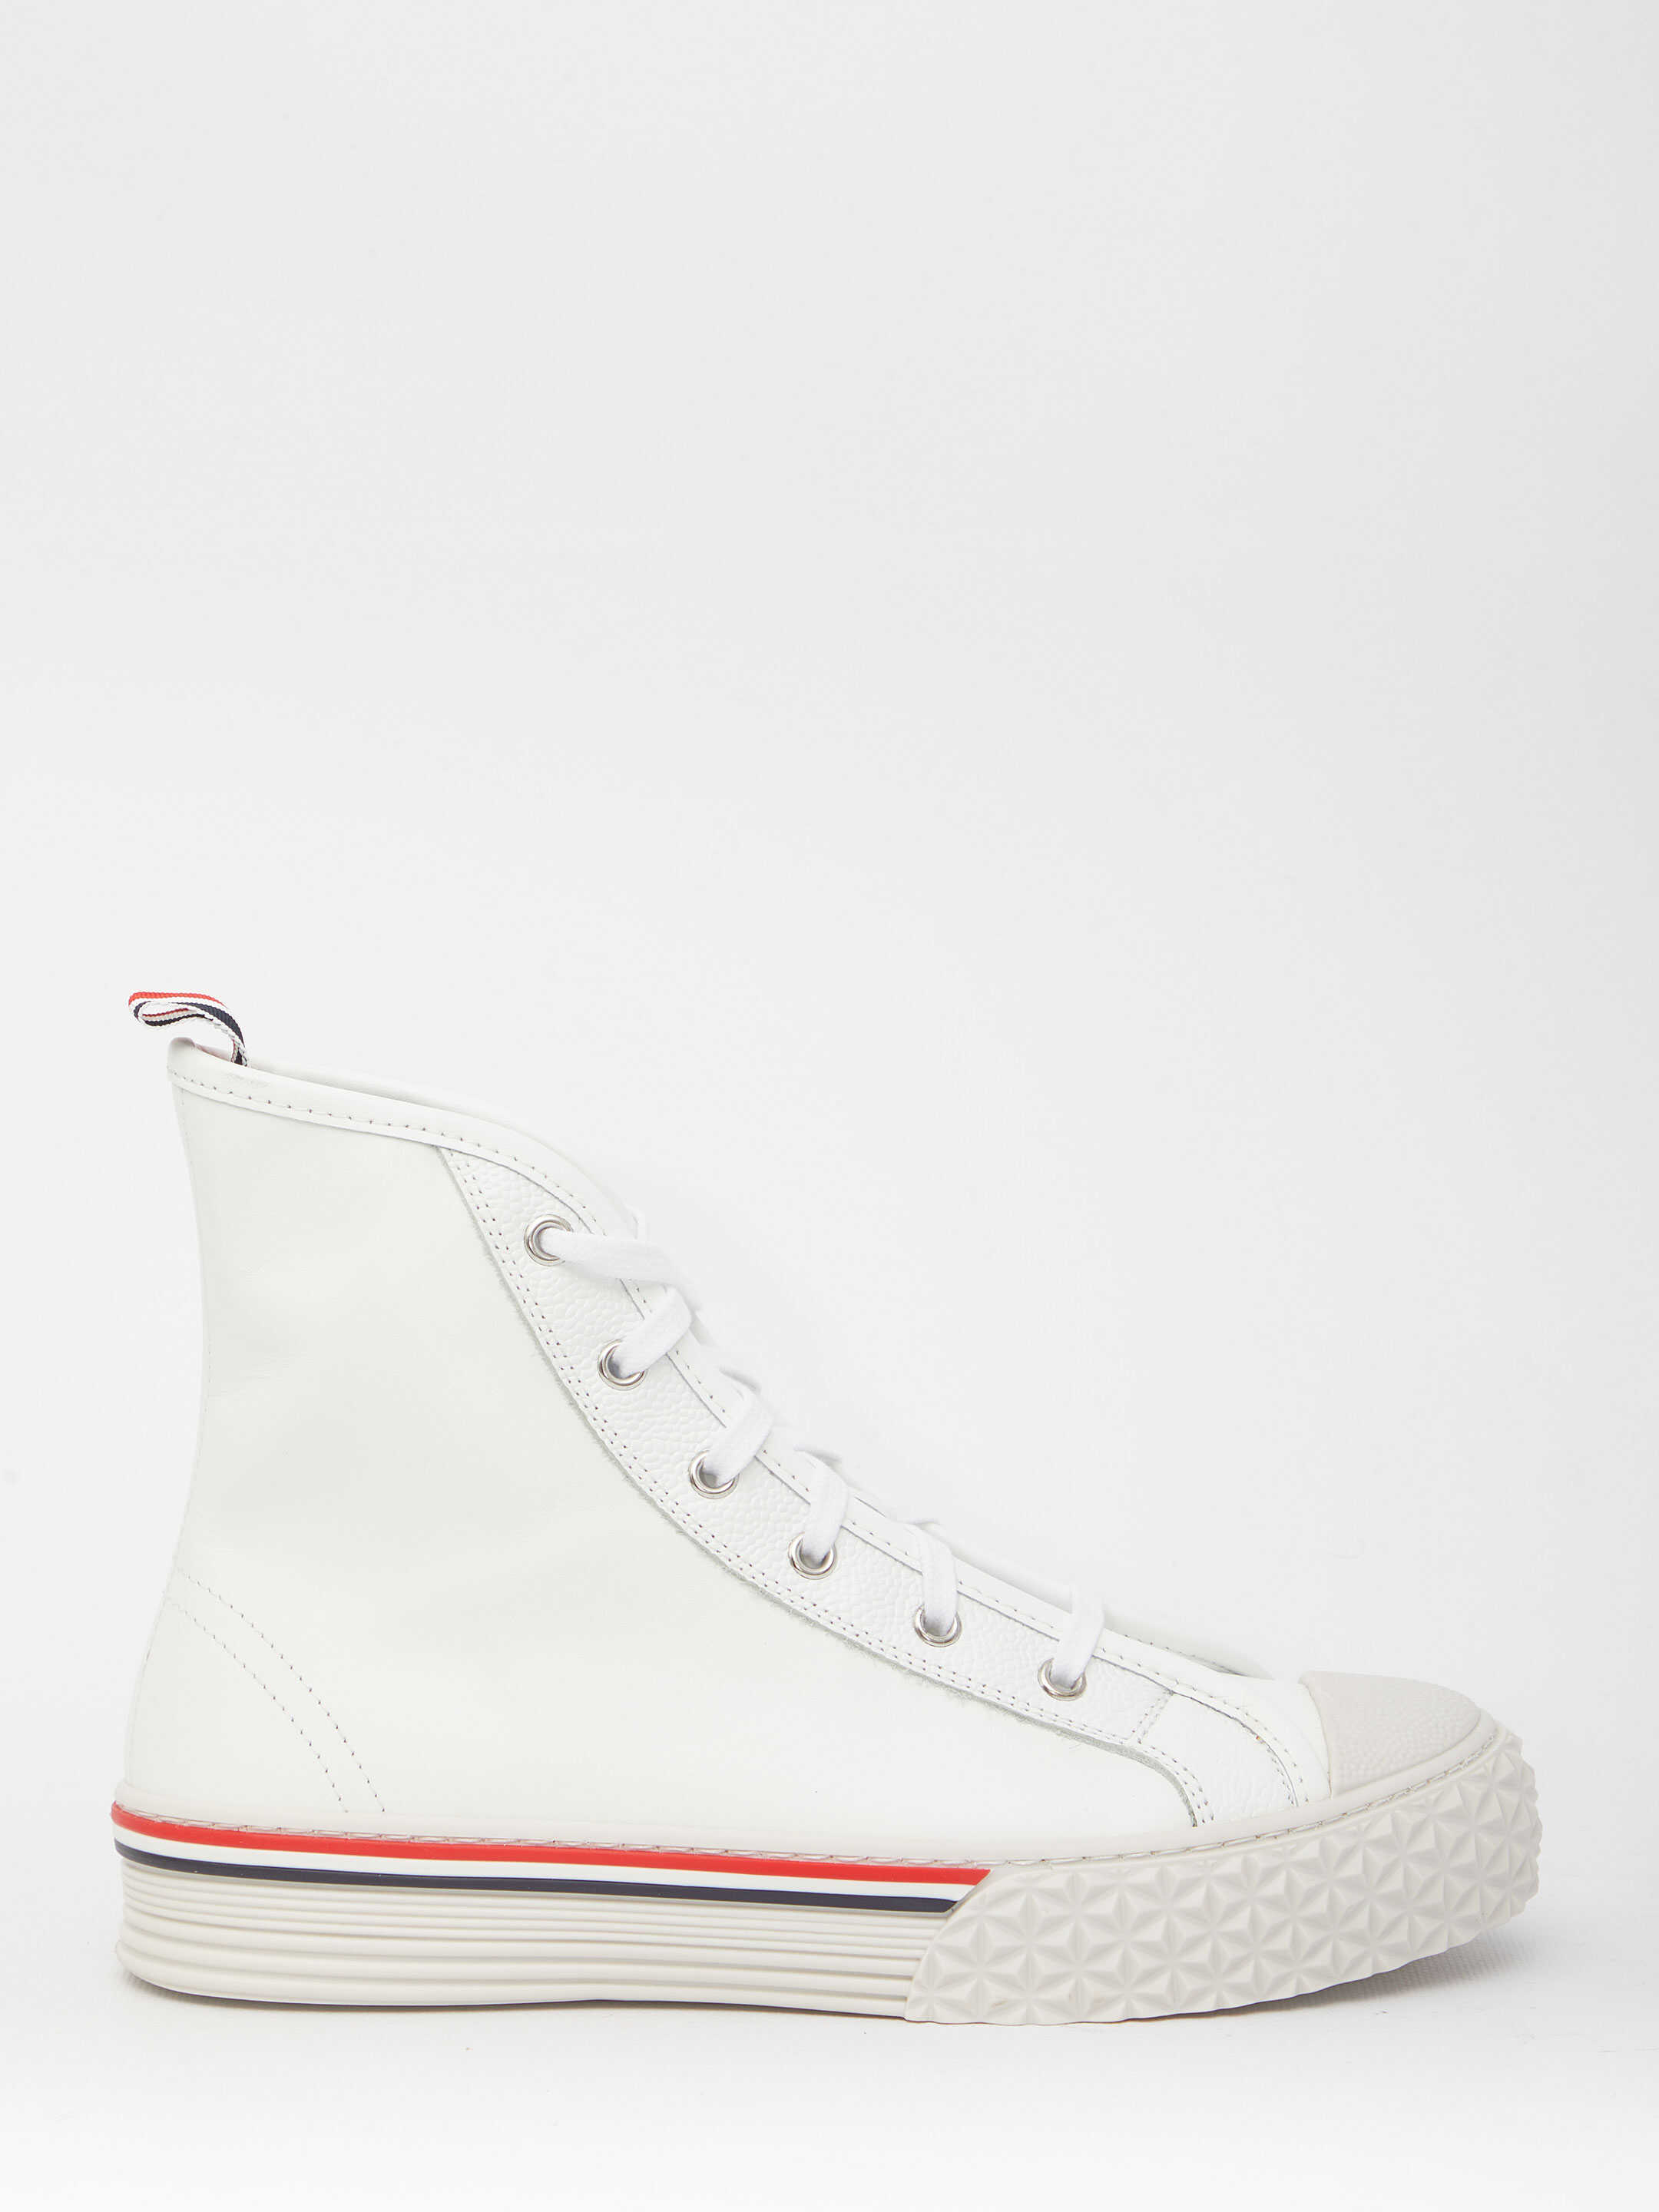 Thom Browne Leather Sneakers White